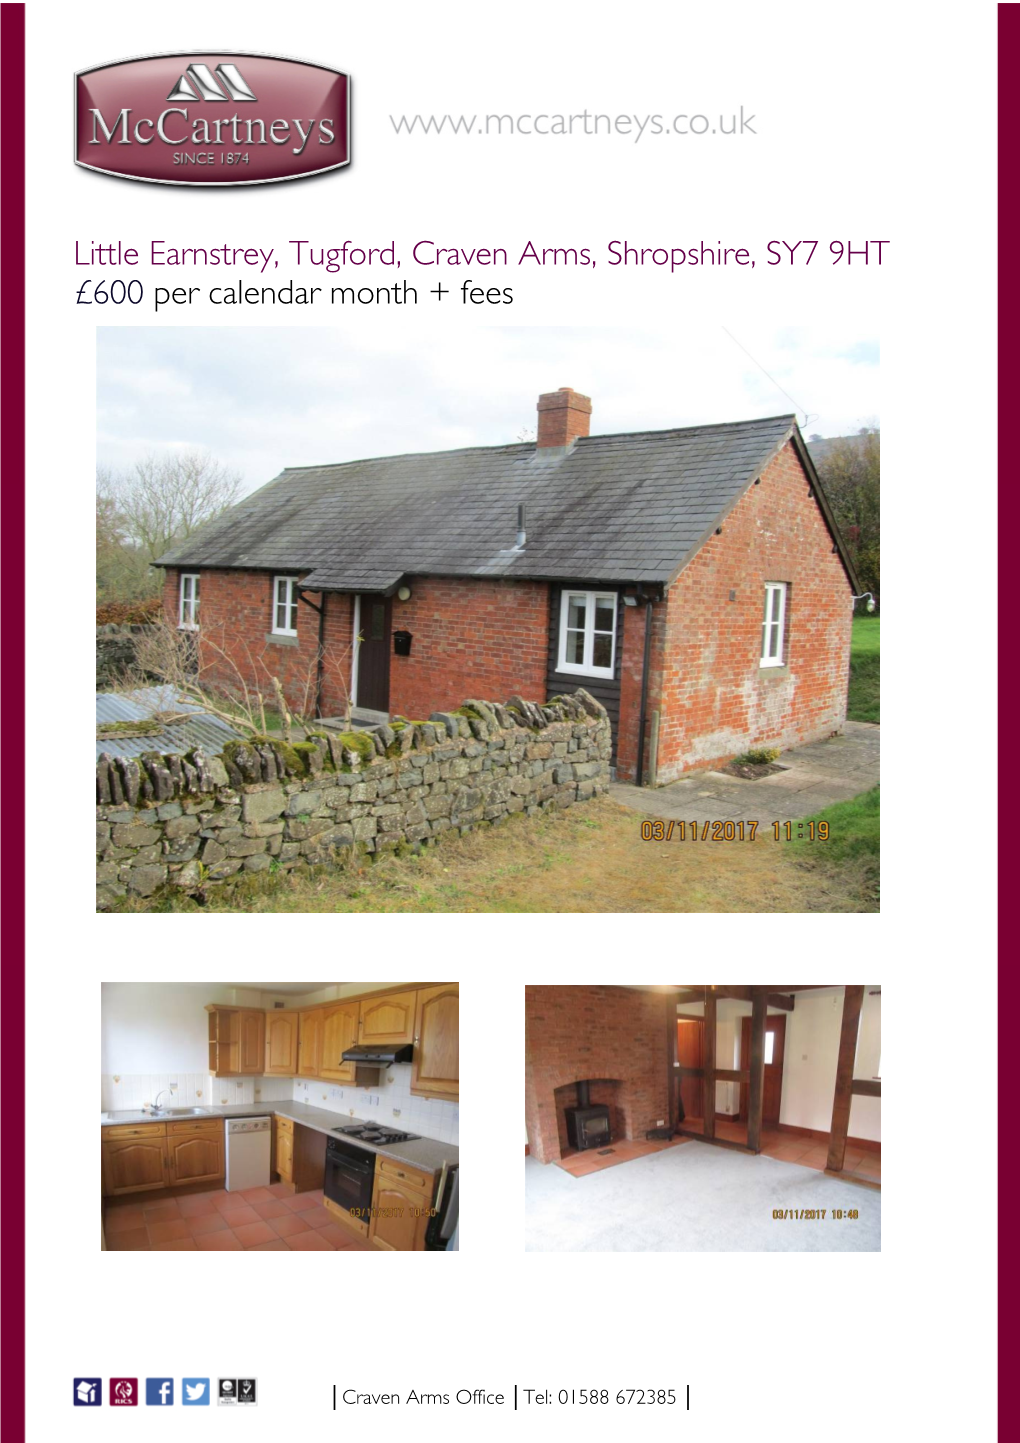 Little Earnstrey, Tugford, Craven Arms, Shropshire, SY7 9HT £600 Per Calendar Month + Fees